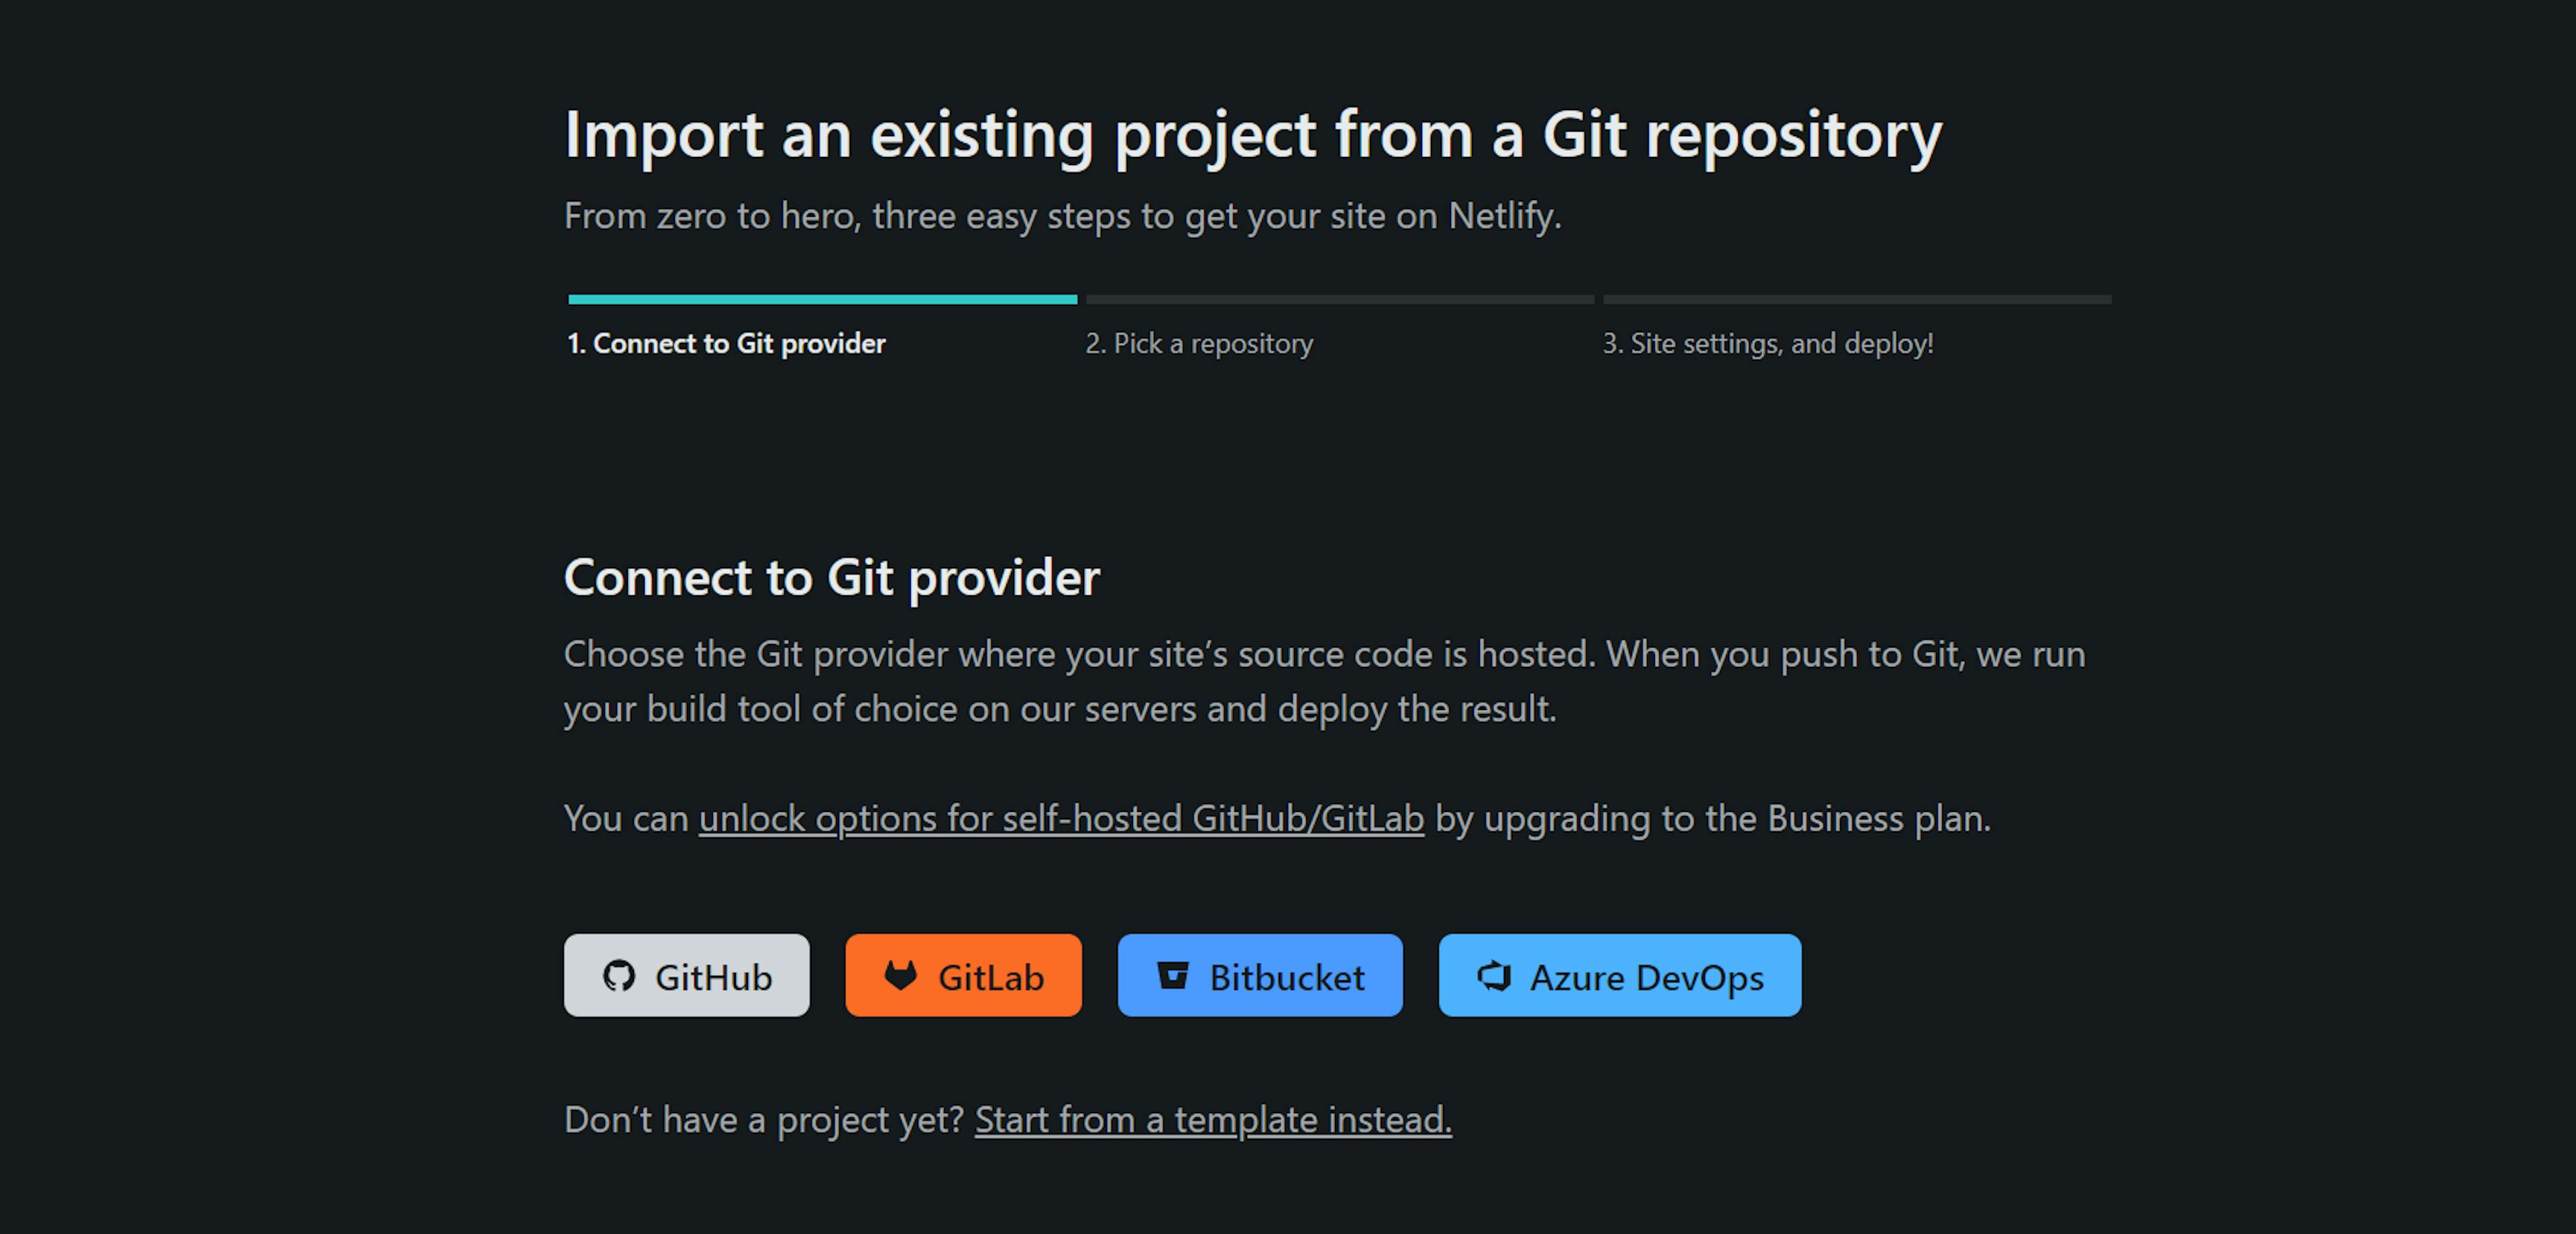 Connect to Git provider